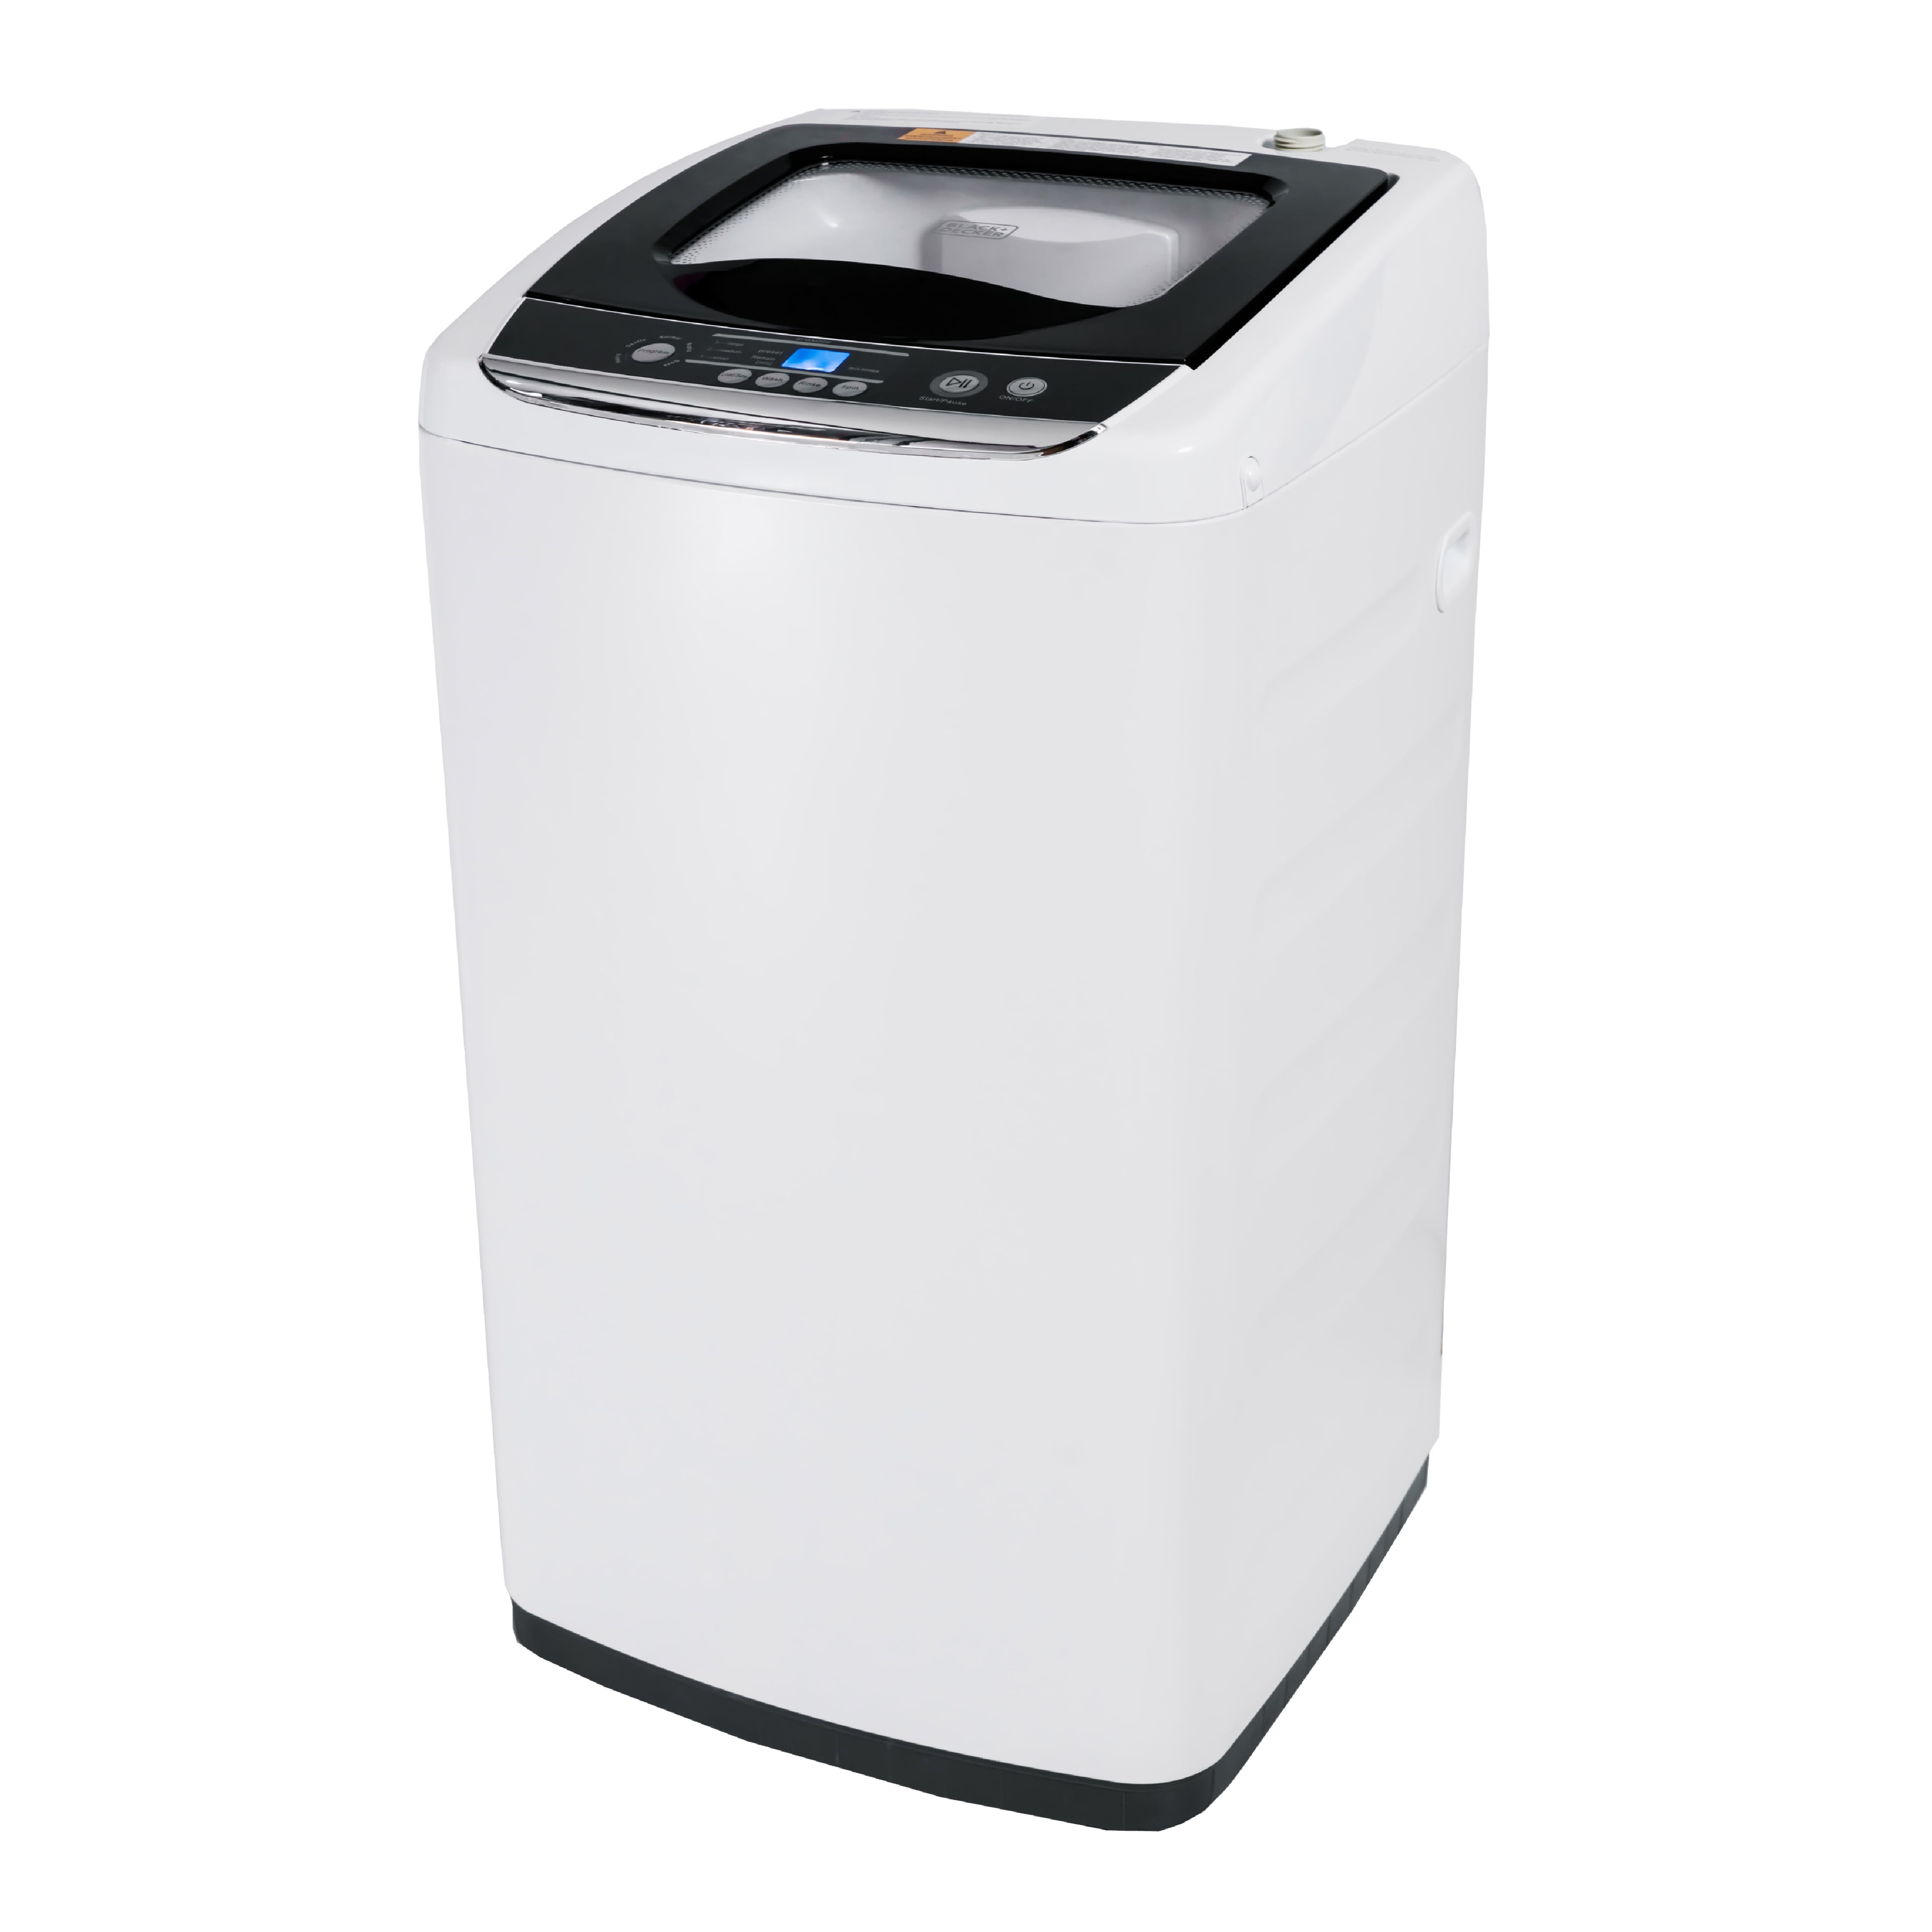 Giantex Full Automatic Washing Machine, 7.7lbs Portable Washer w/Heating  Functions, Compact Laundry Washer for Apt/Dorm/RV 